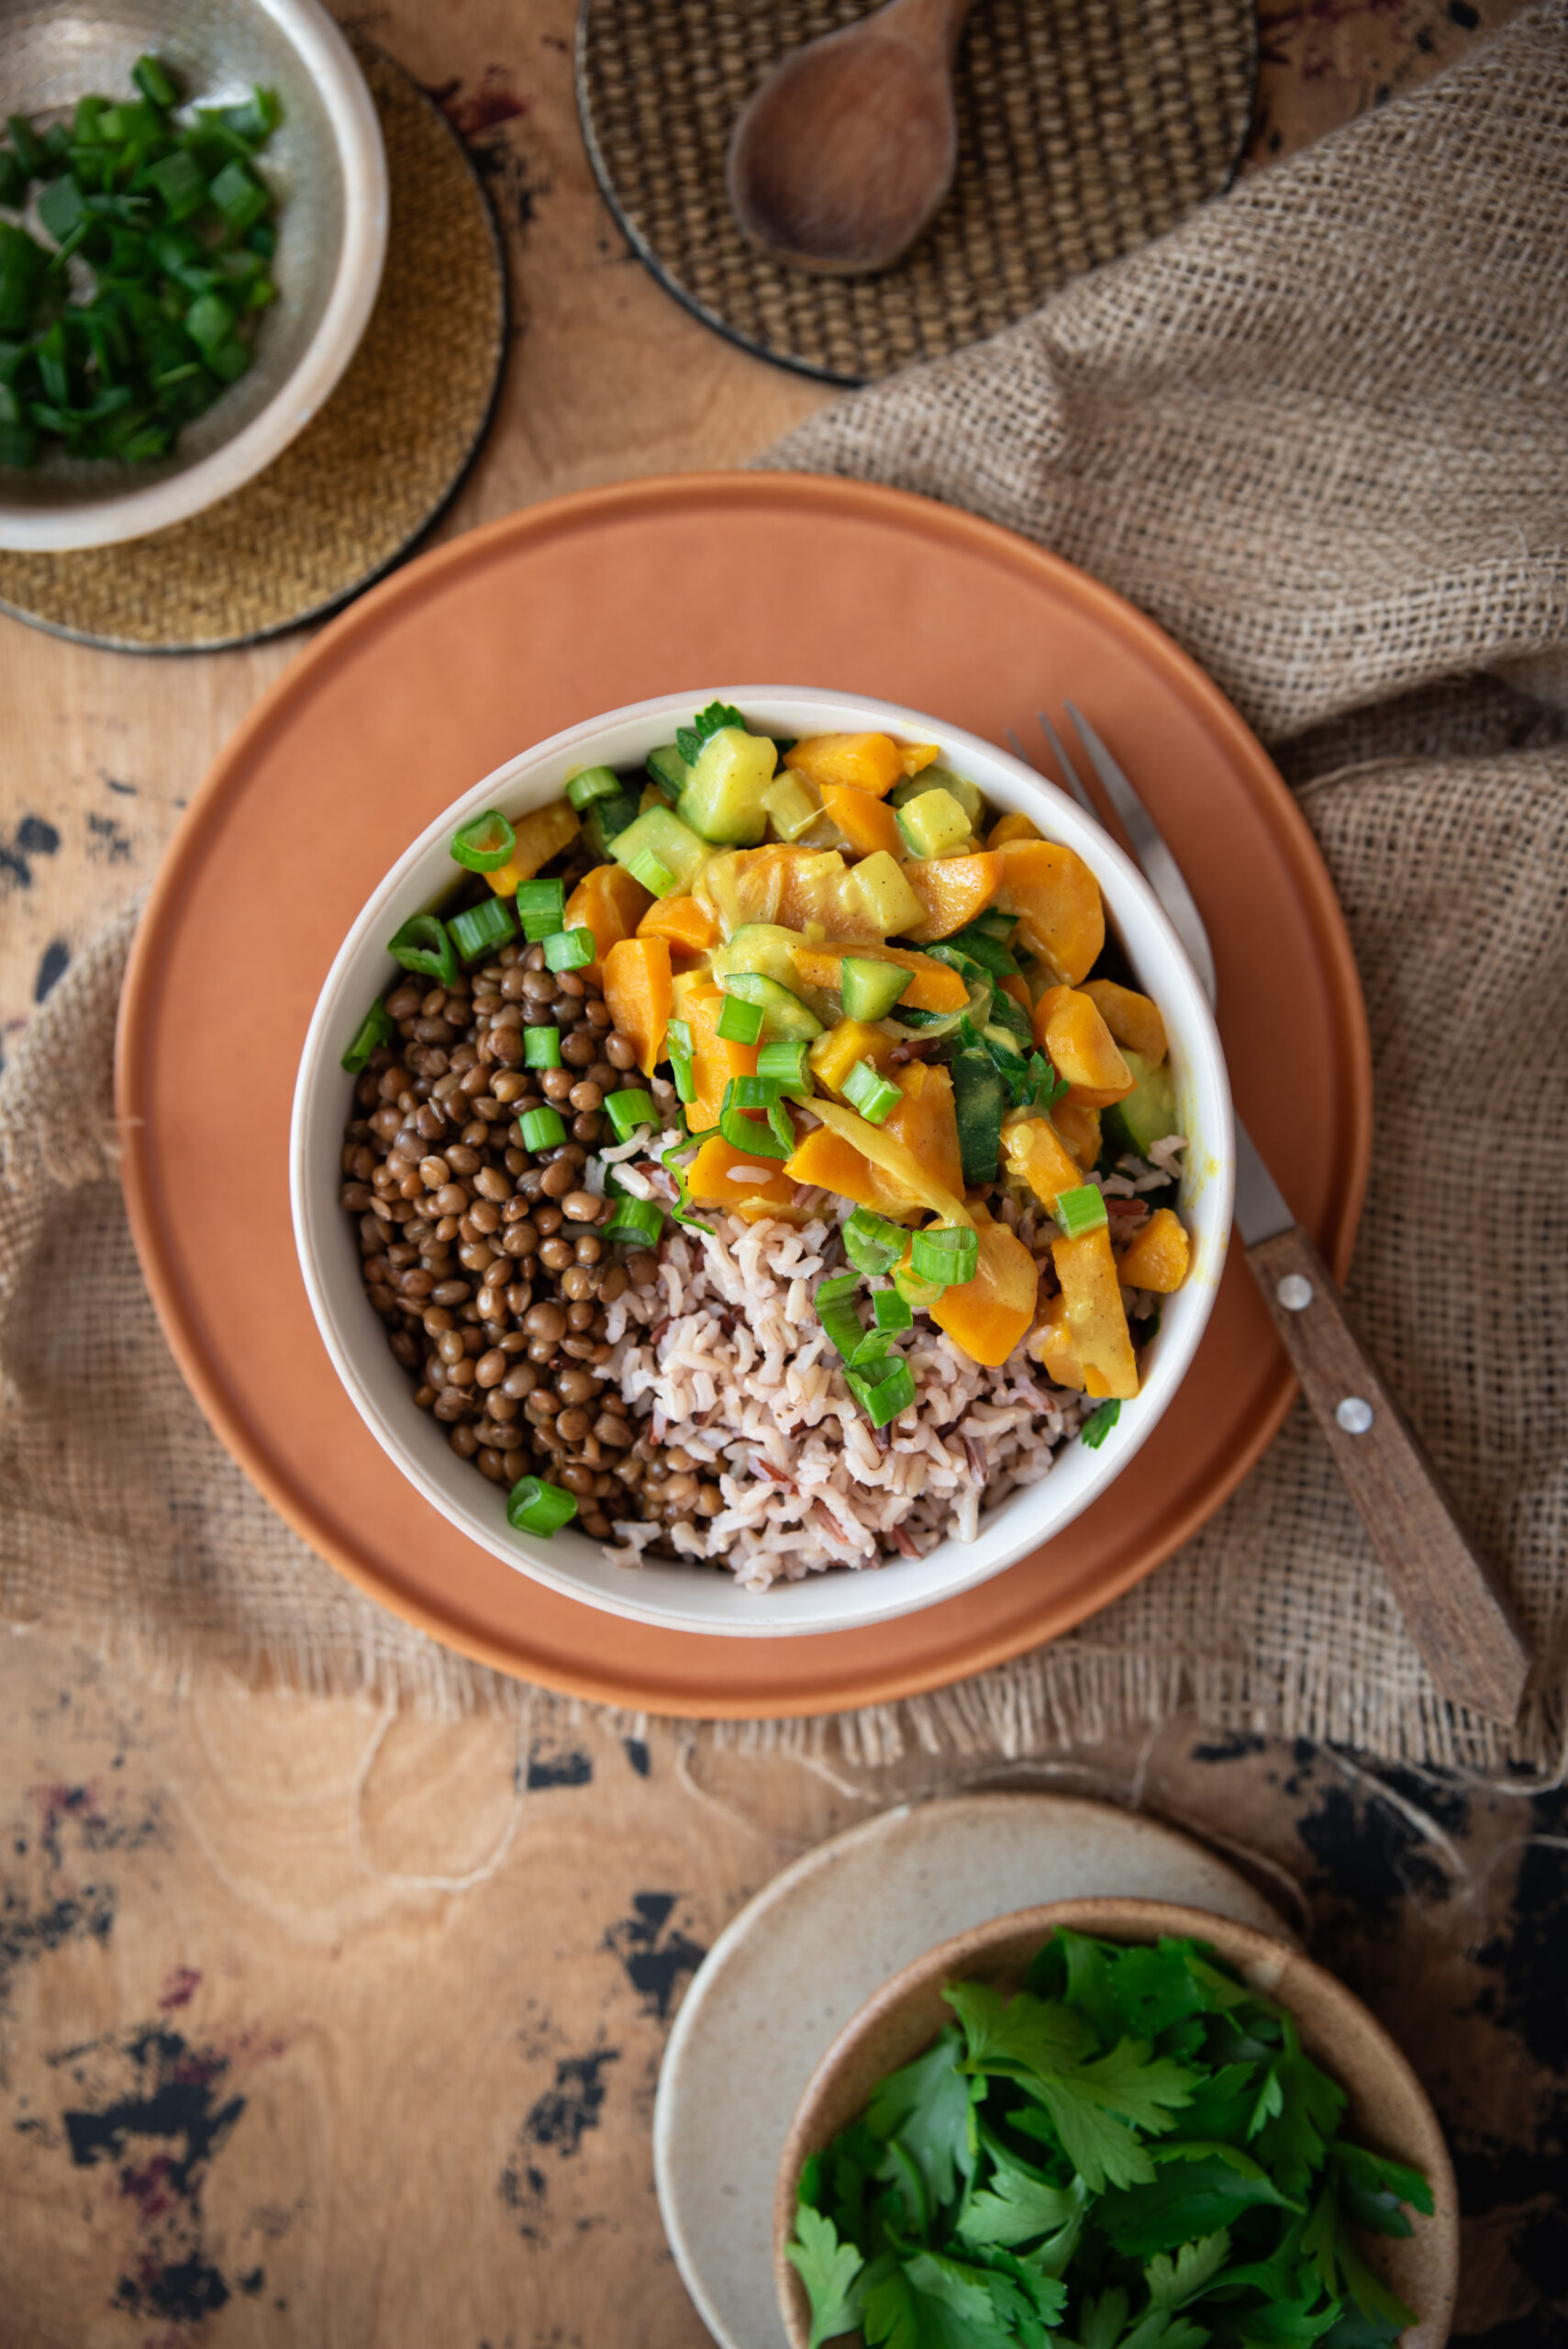 Green lentil and vegetable curry